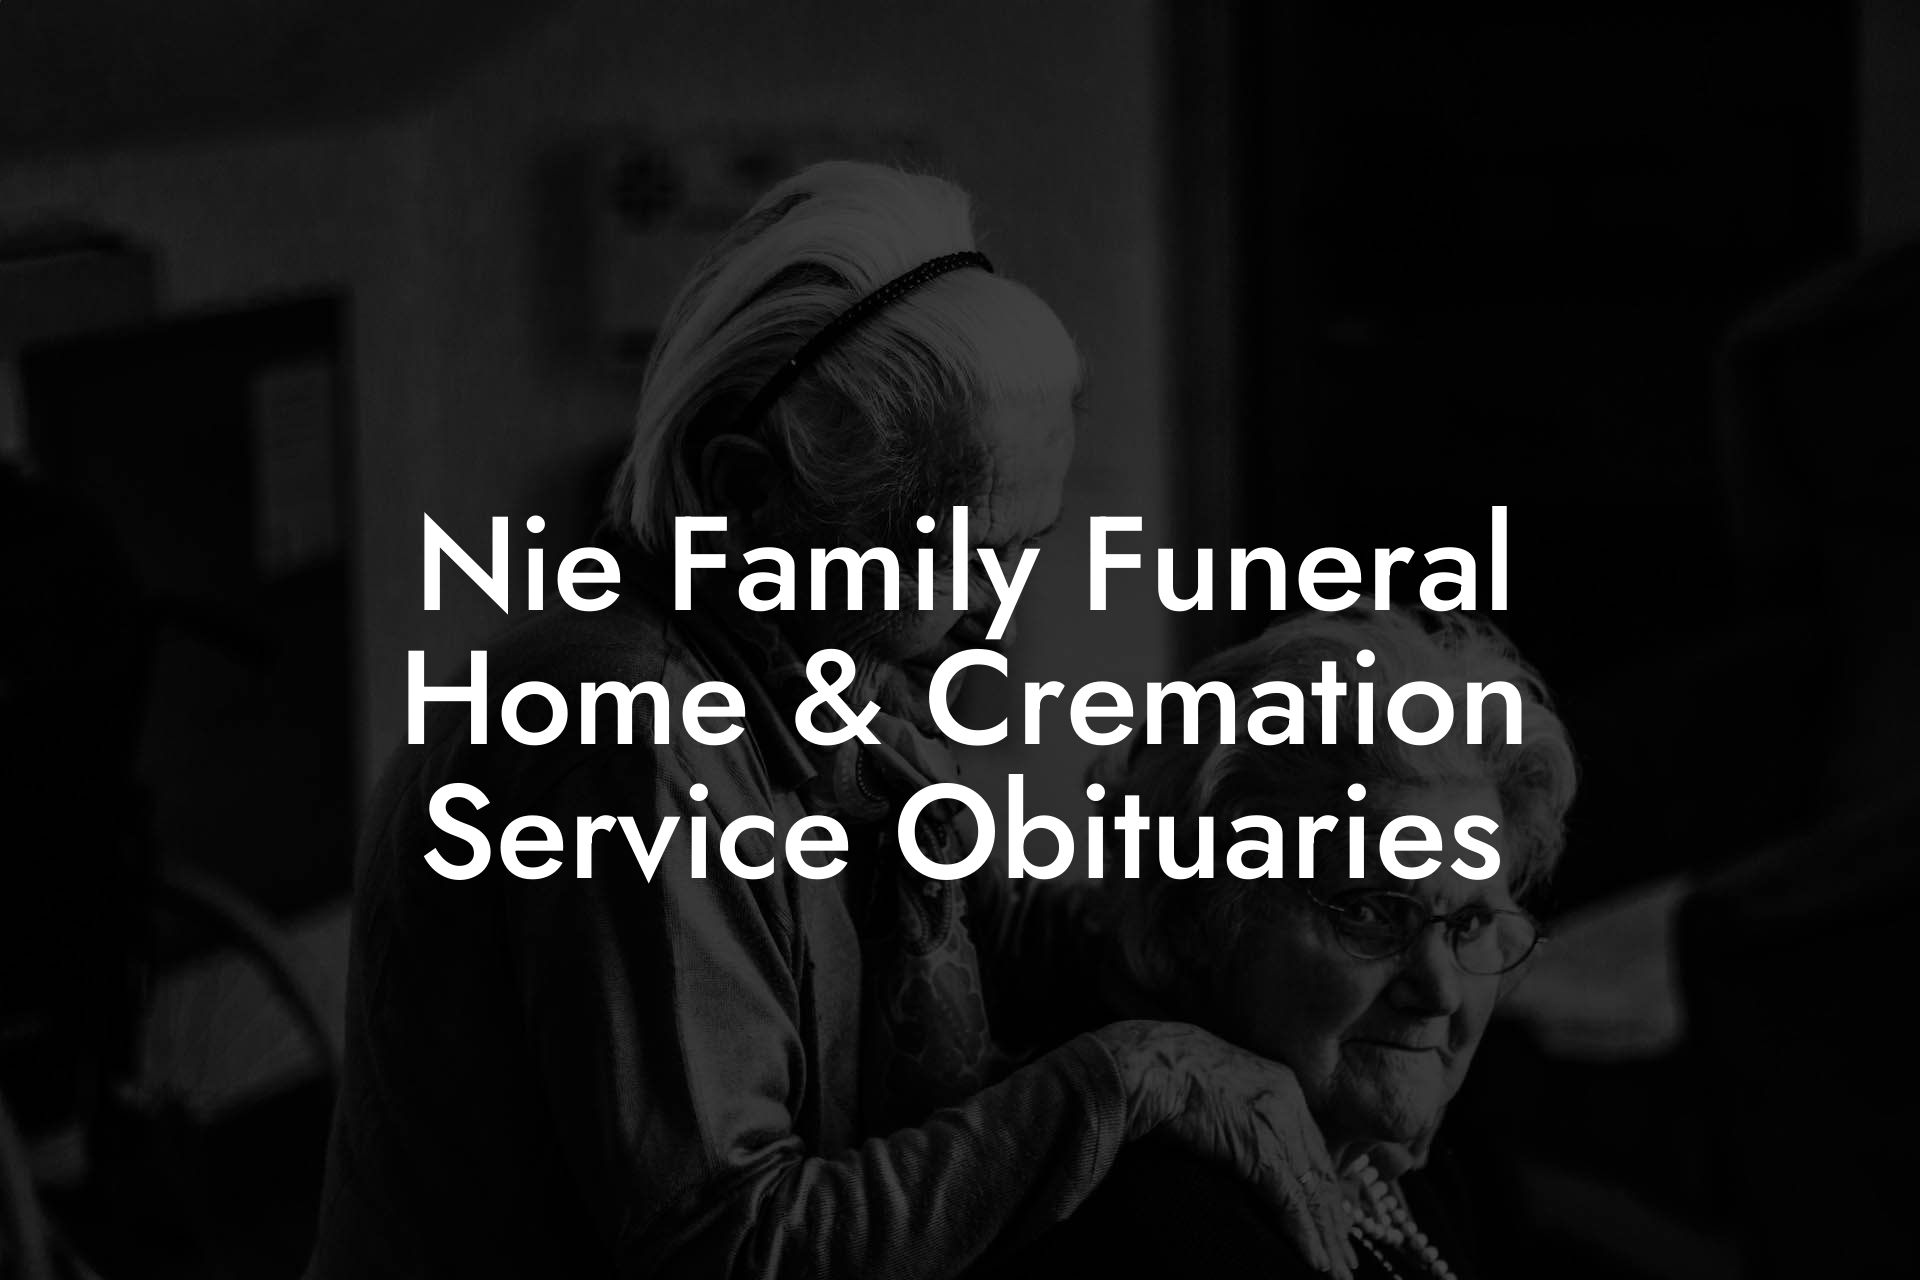 Nie Family Funeral Home & Cremation Service Obituaries